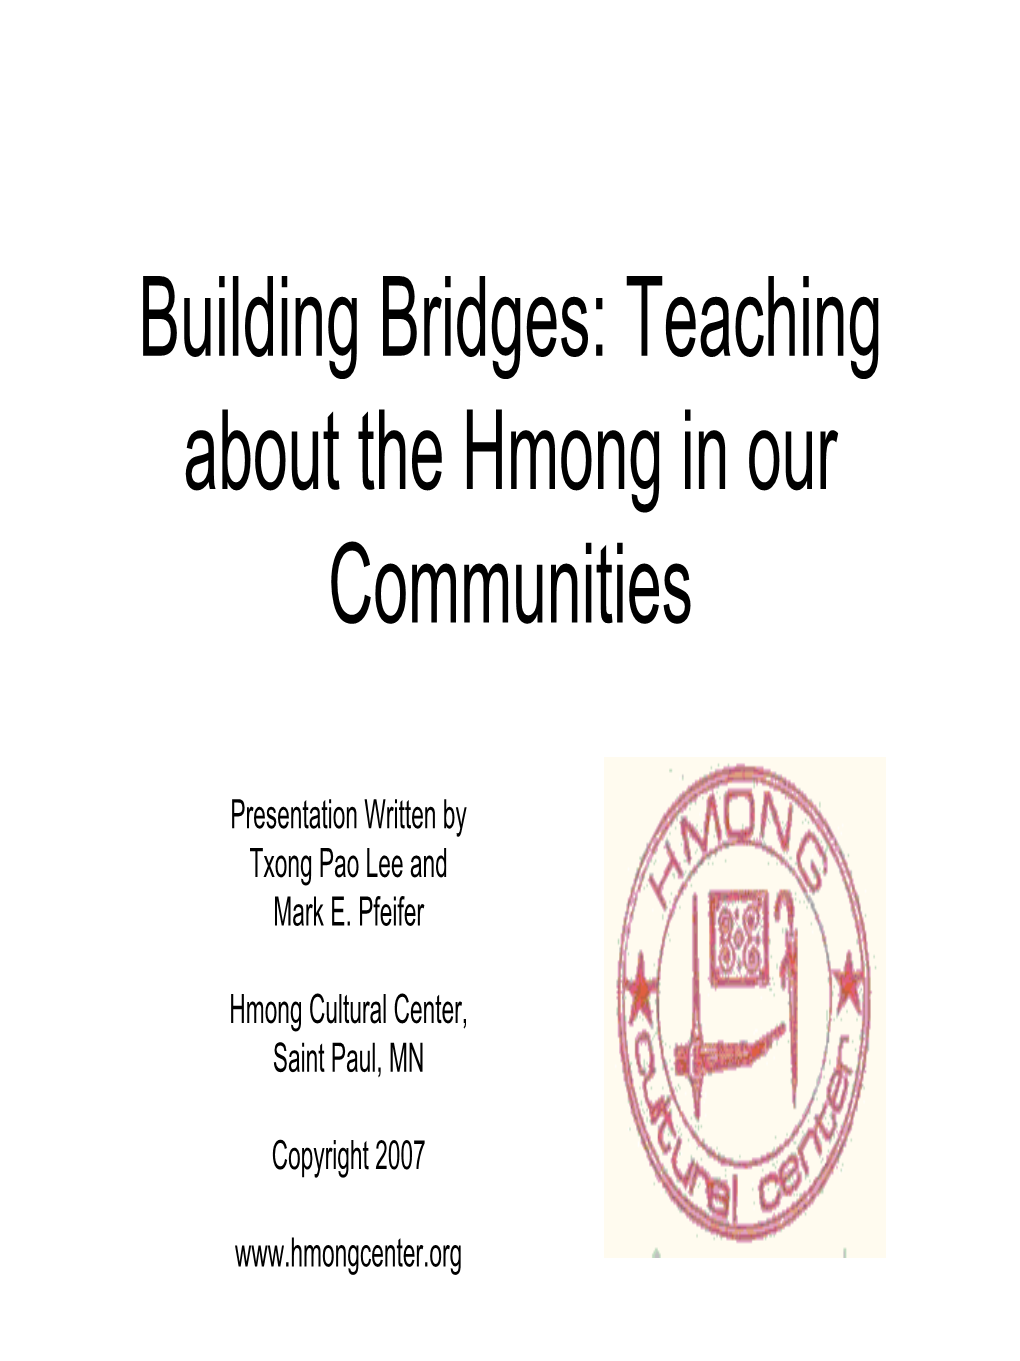 Building Bridges: Teaching About the Hmong in Our Communities